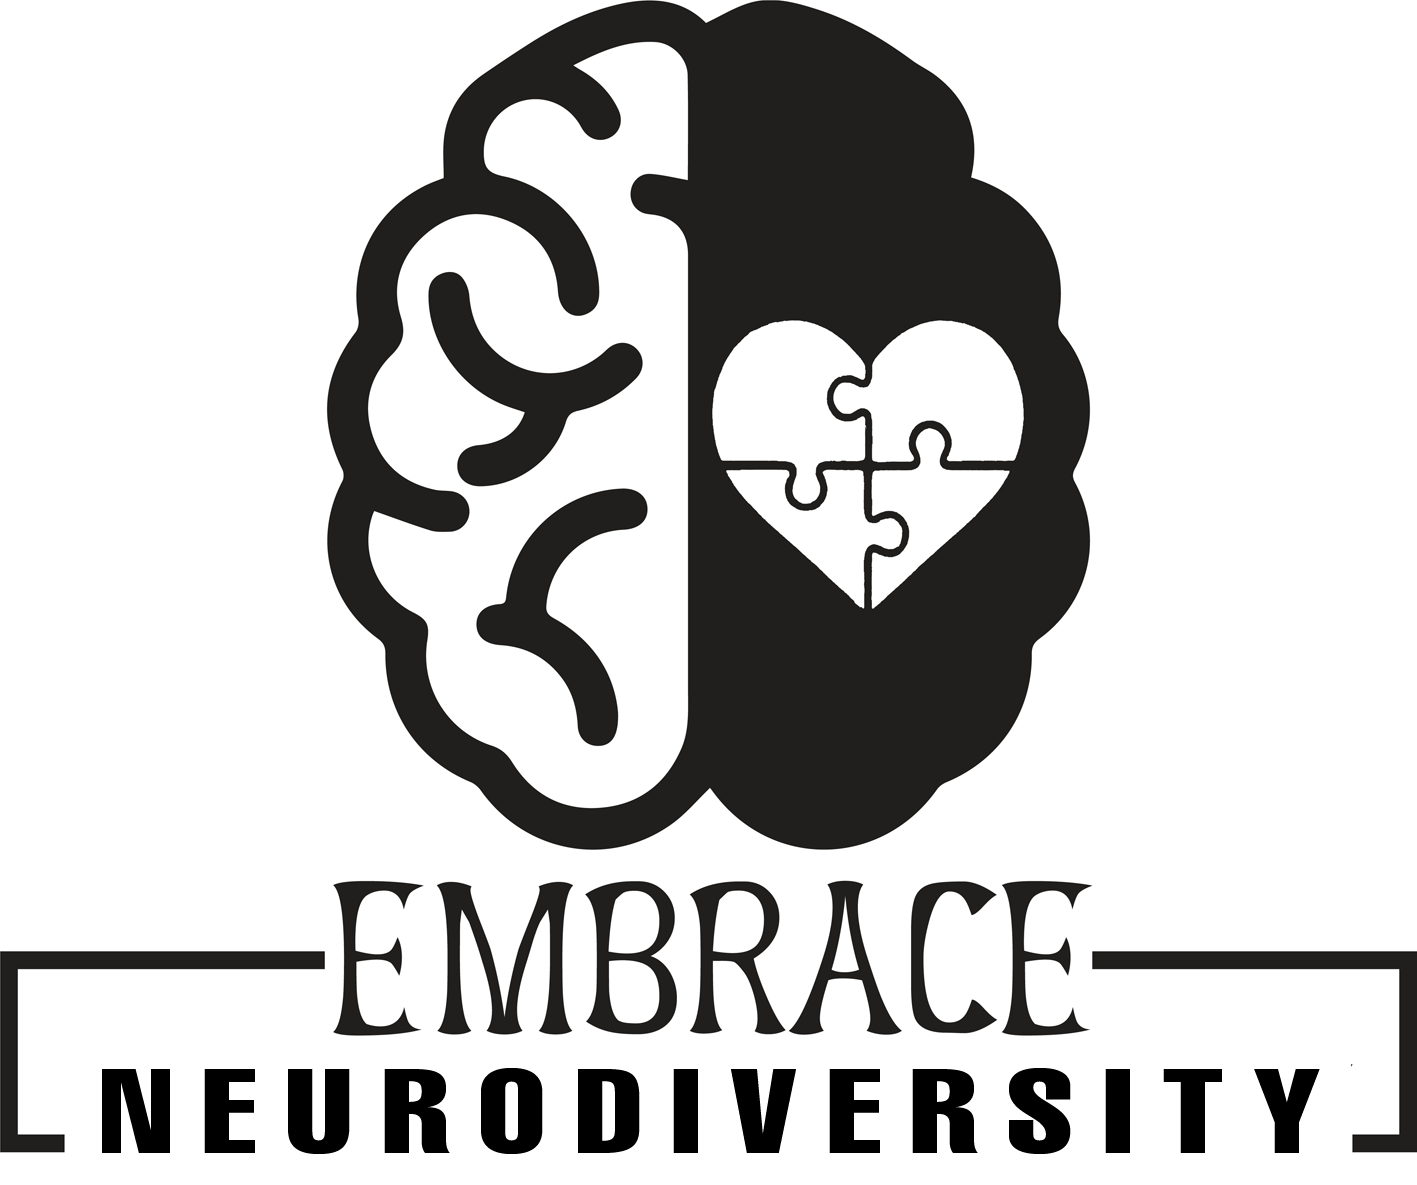 Embrace your neurodiversity and through a supportive network harness it as a strength and not a limitation